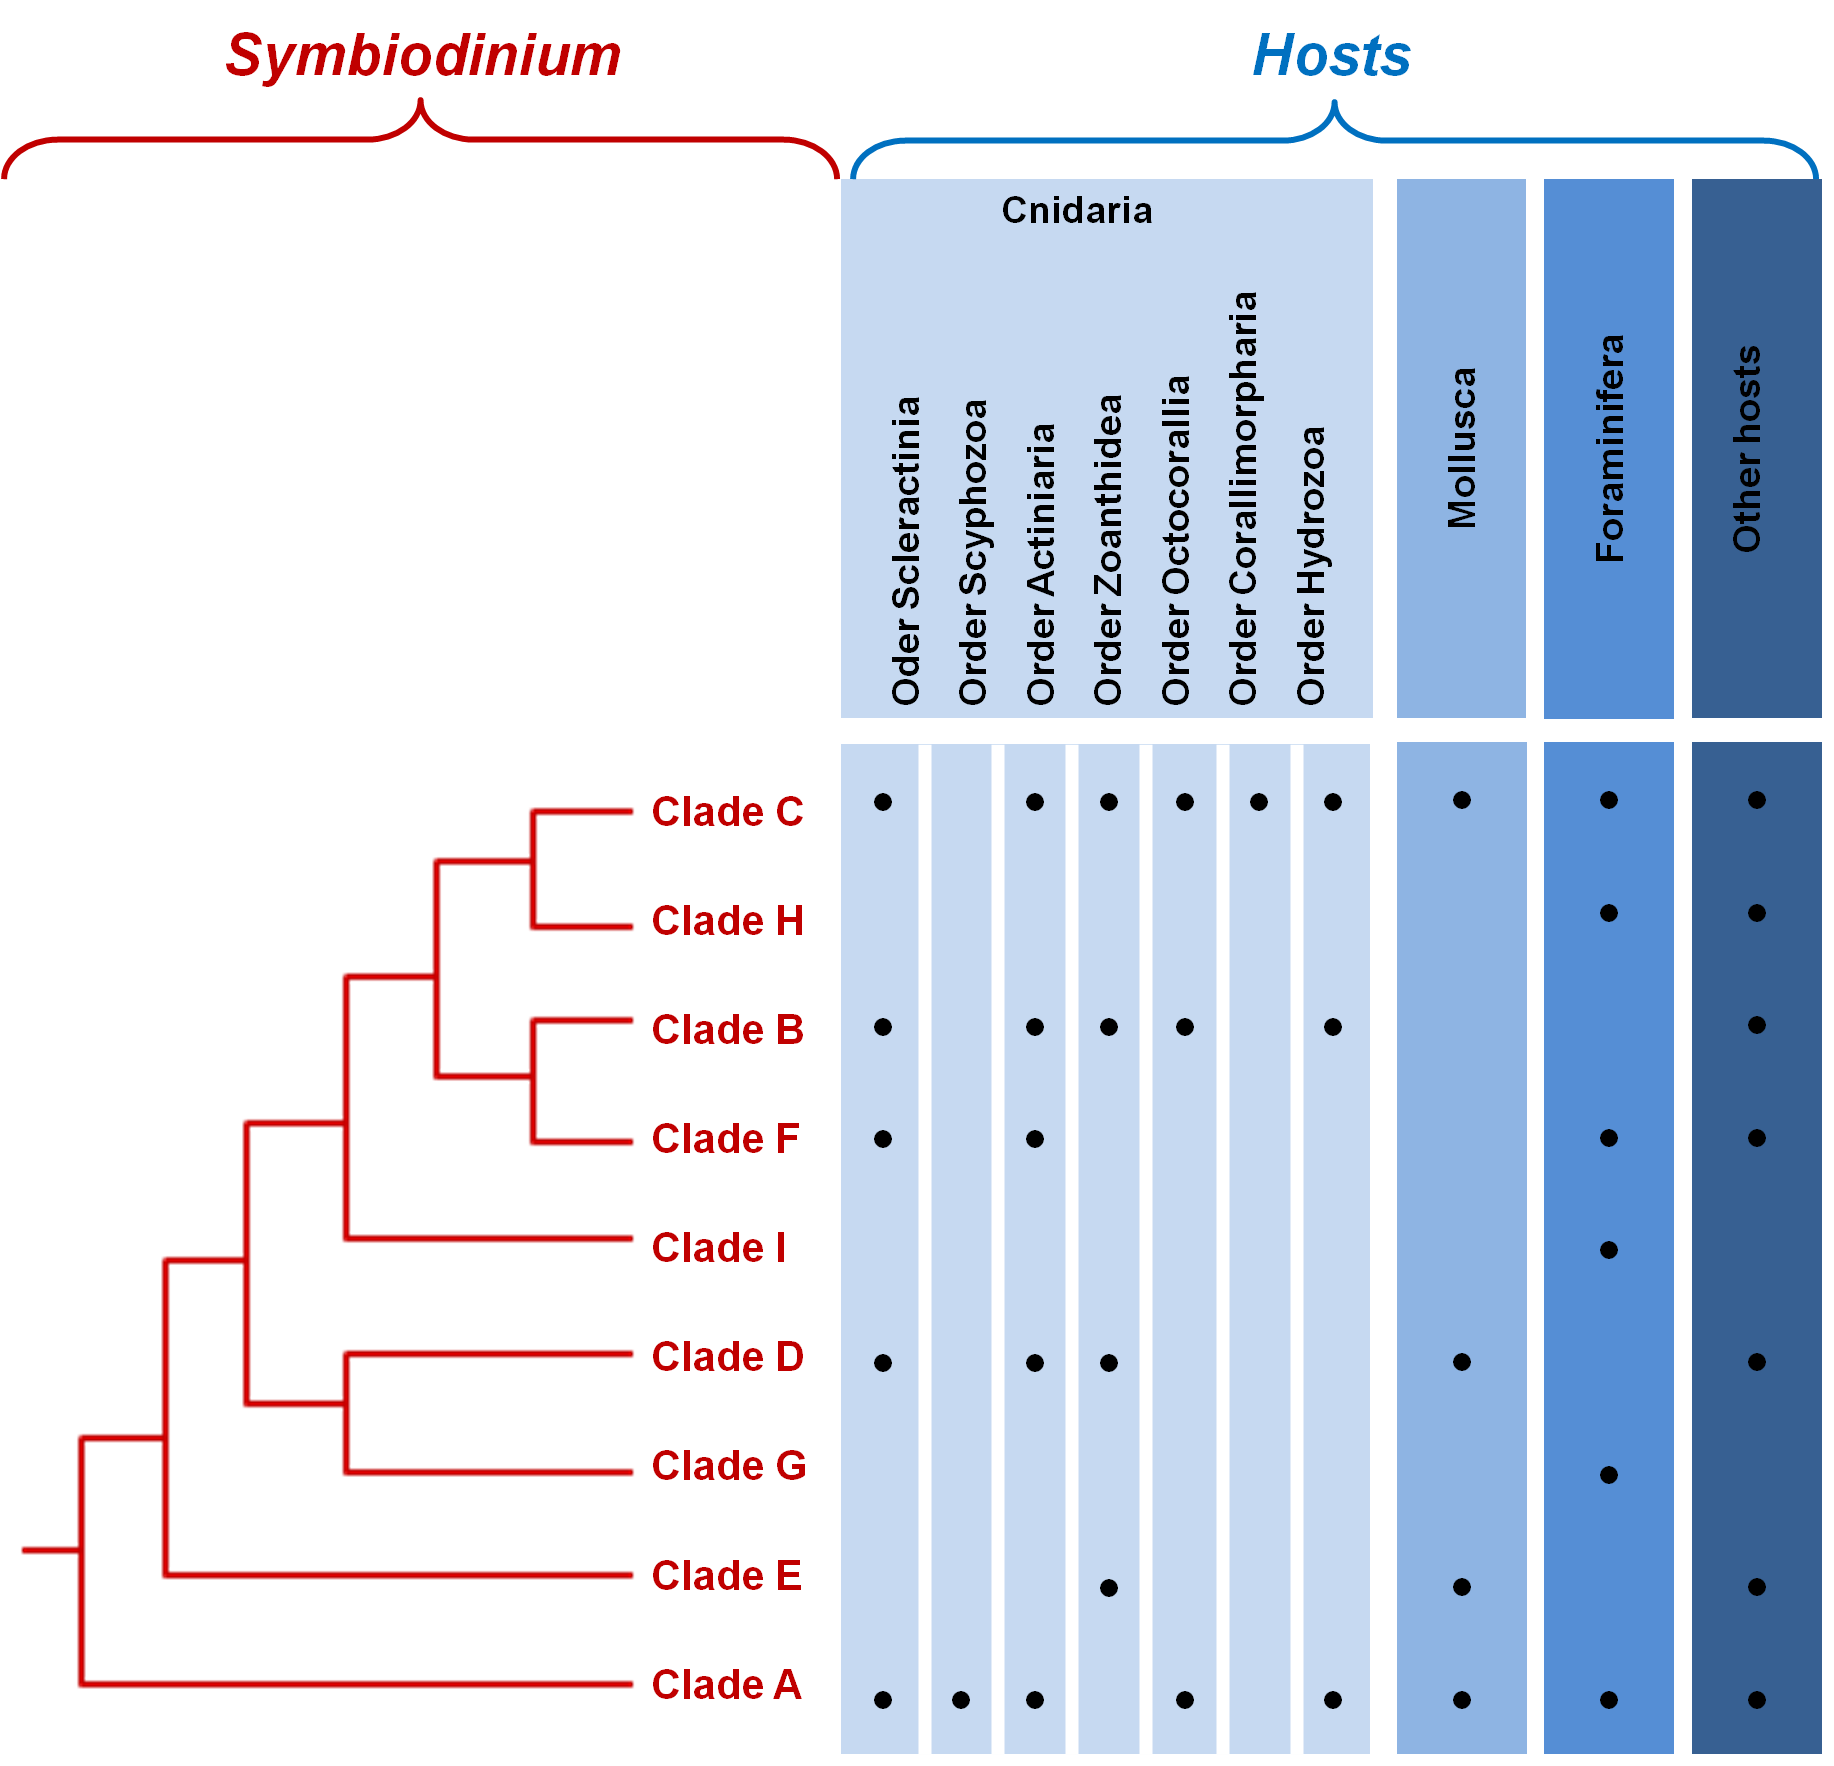 Phylogenetic relationships between the major clades of Symbiodinium.